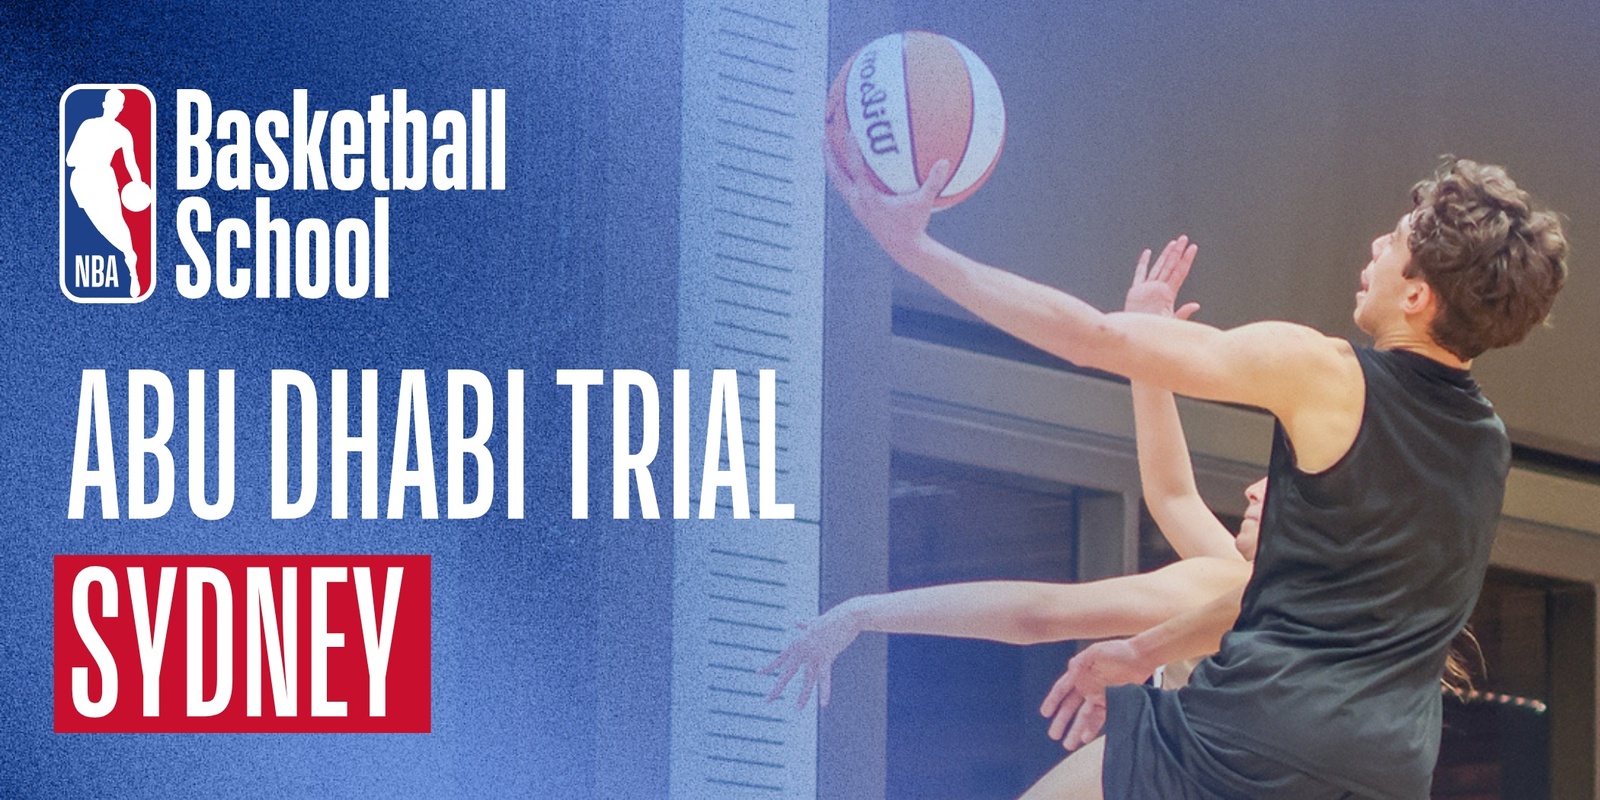 Banner image for Sydney Trial for Abu Dhabi Tournament hosted by NBA Basketball School Australia